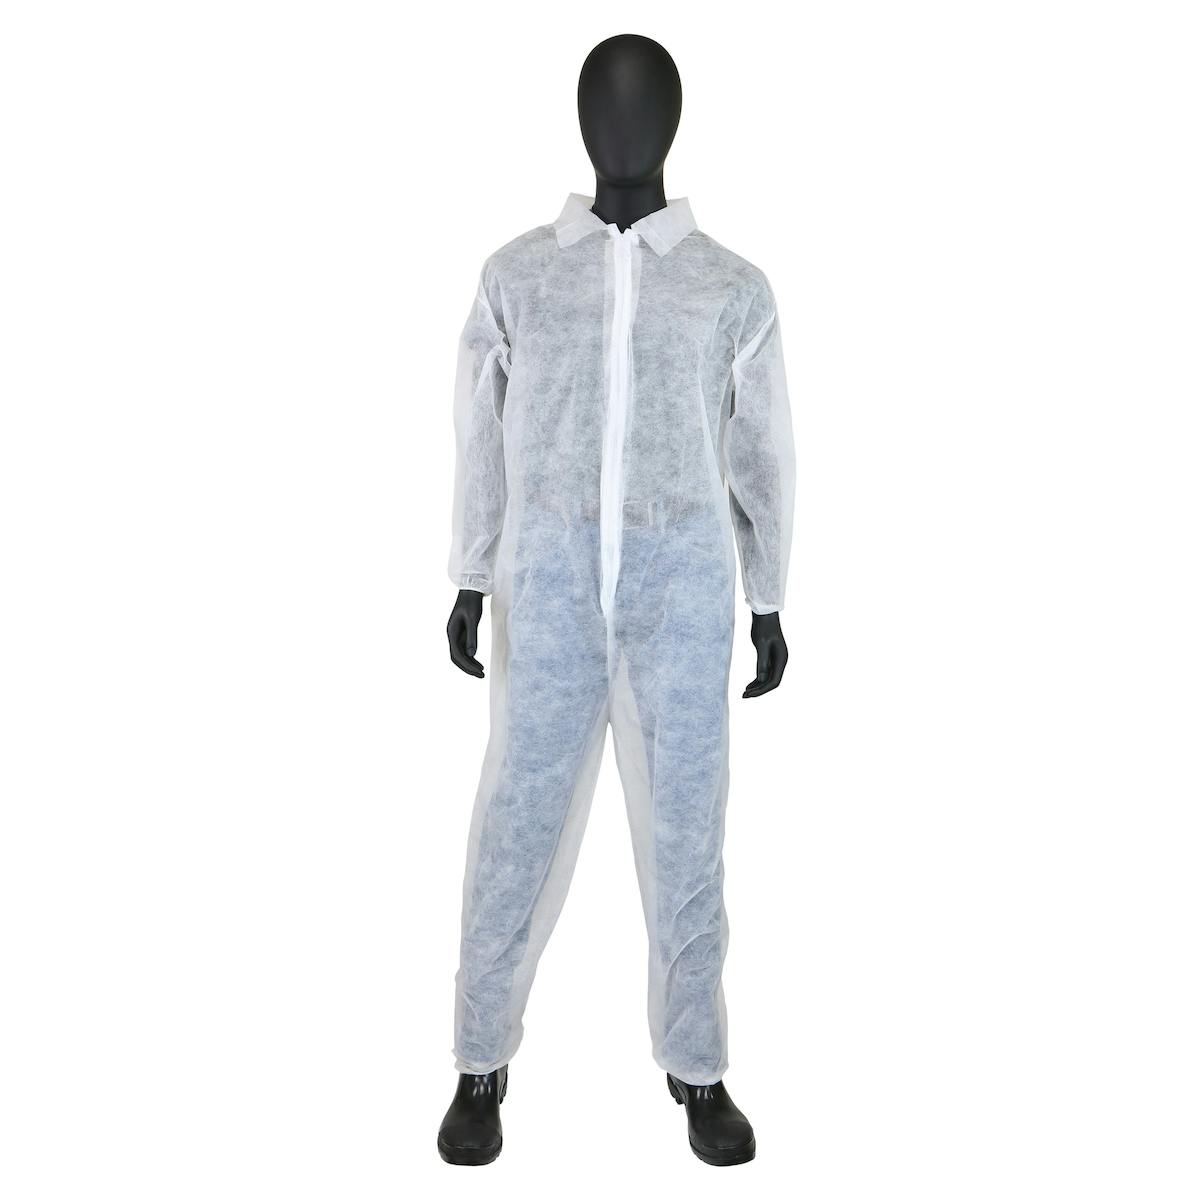 Standard Weight 20GSM SBP Coverall-Elastic Wrist & Ankles, White (3502)